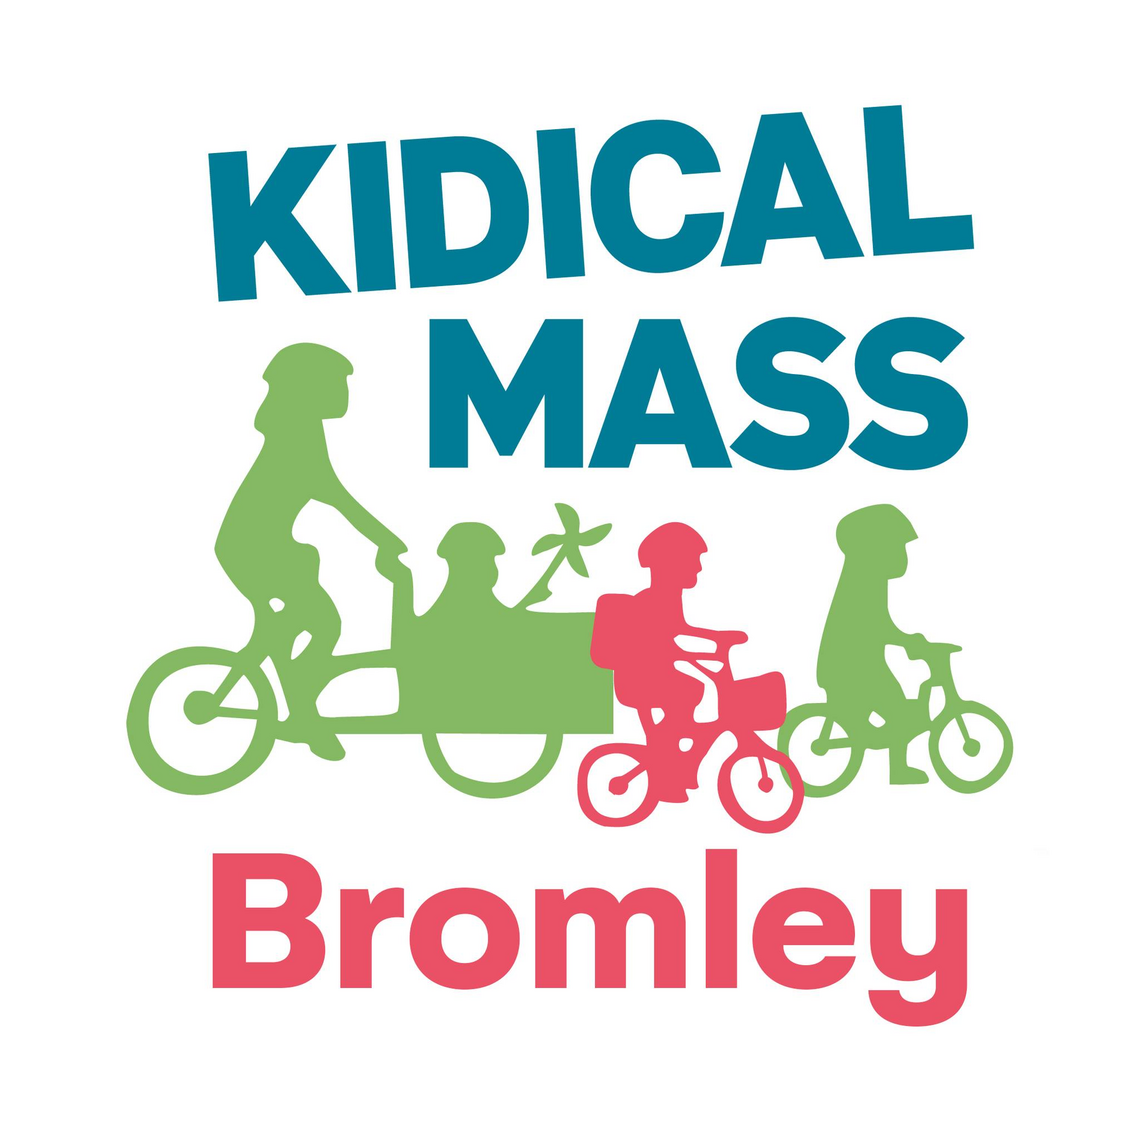 Image with silhouettes of cyclists and words, Kidical Mass Bromley